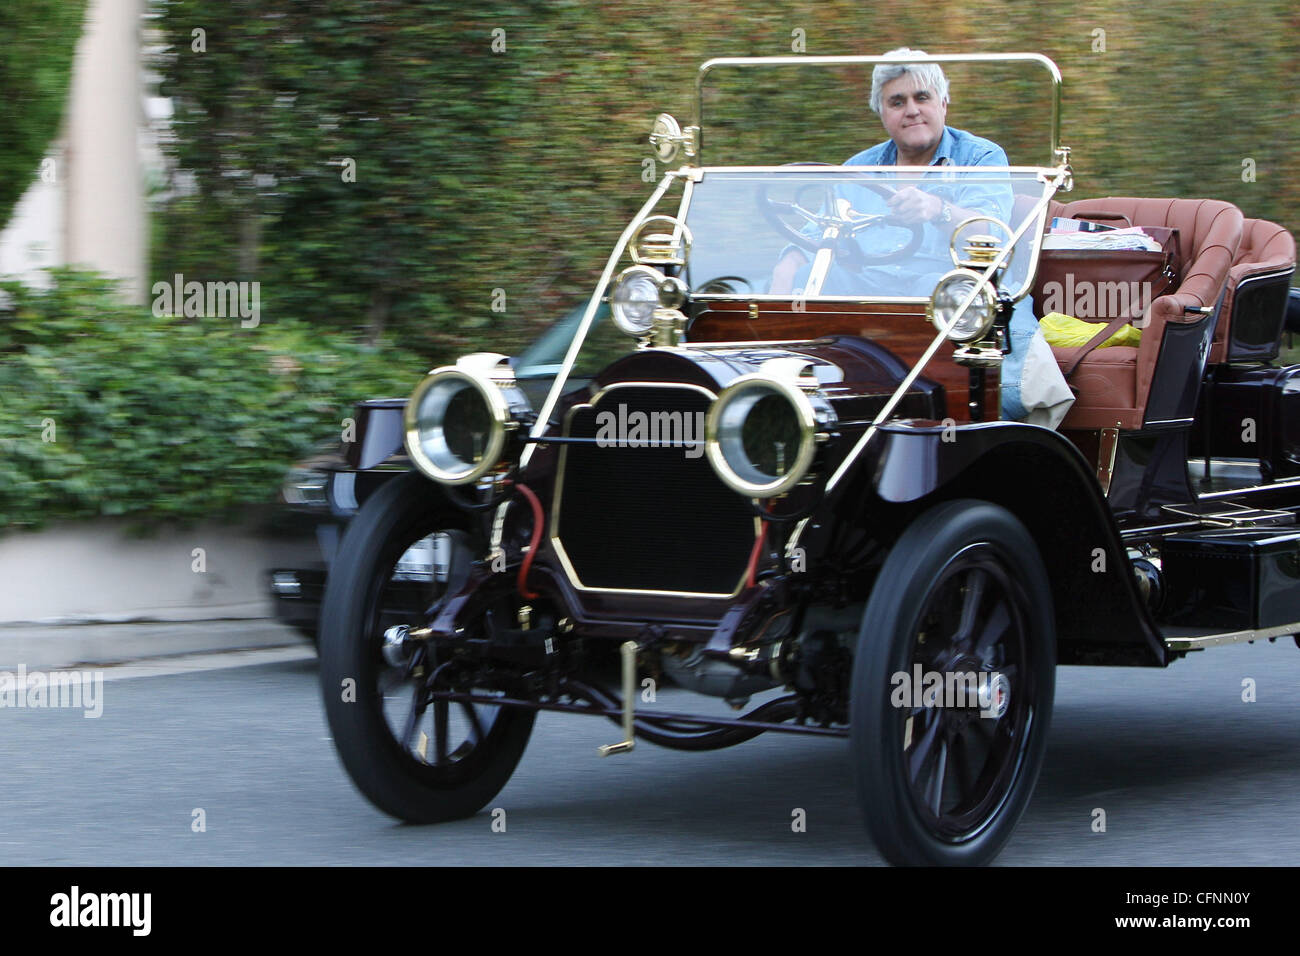 Jay Leno drives through Beverly Hills in a vintage classic automobile Beverly Hills, Los Angeles - 12.02.11 Stock Photo